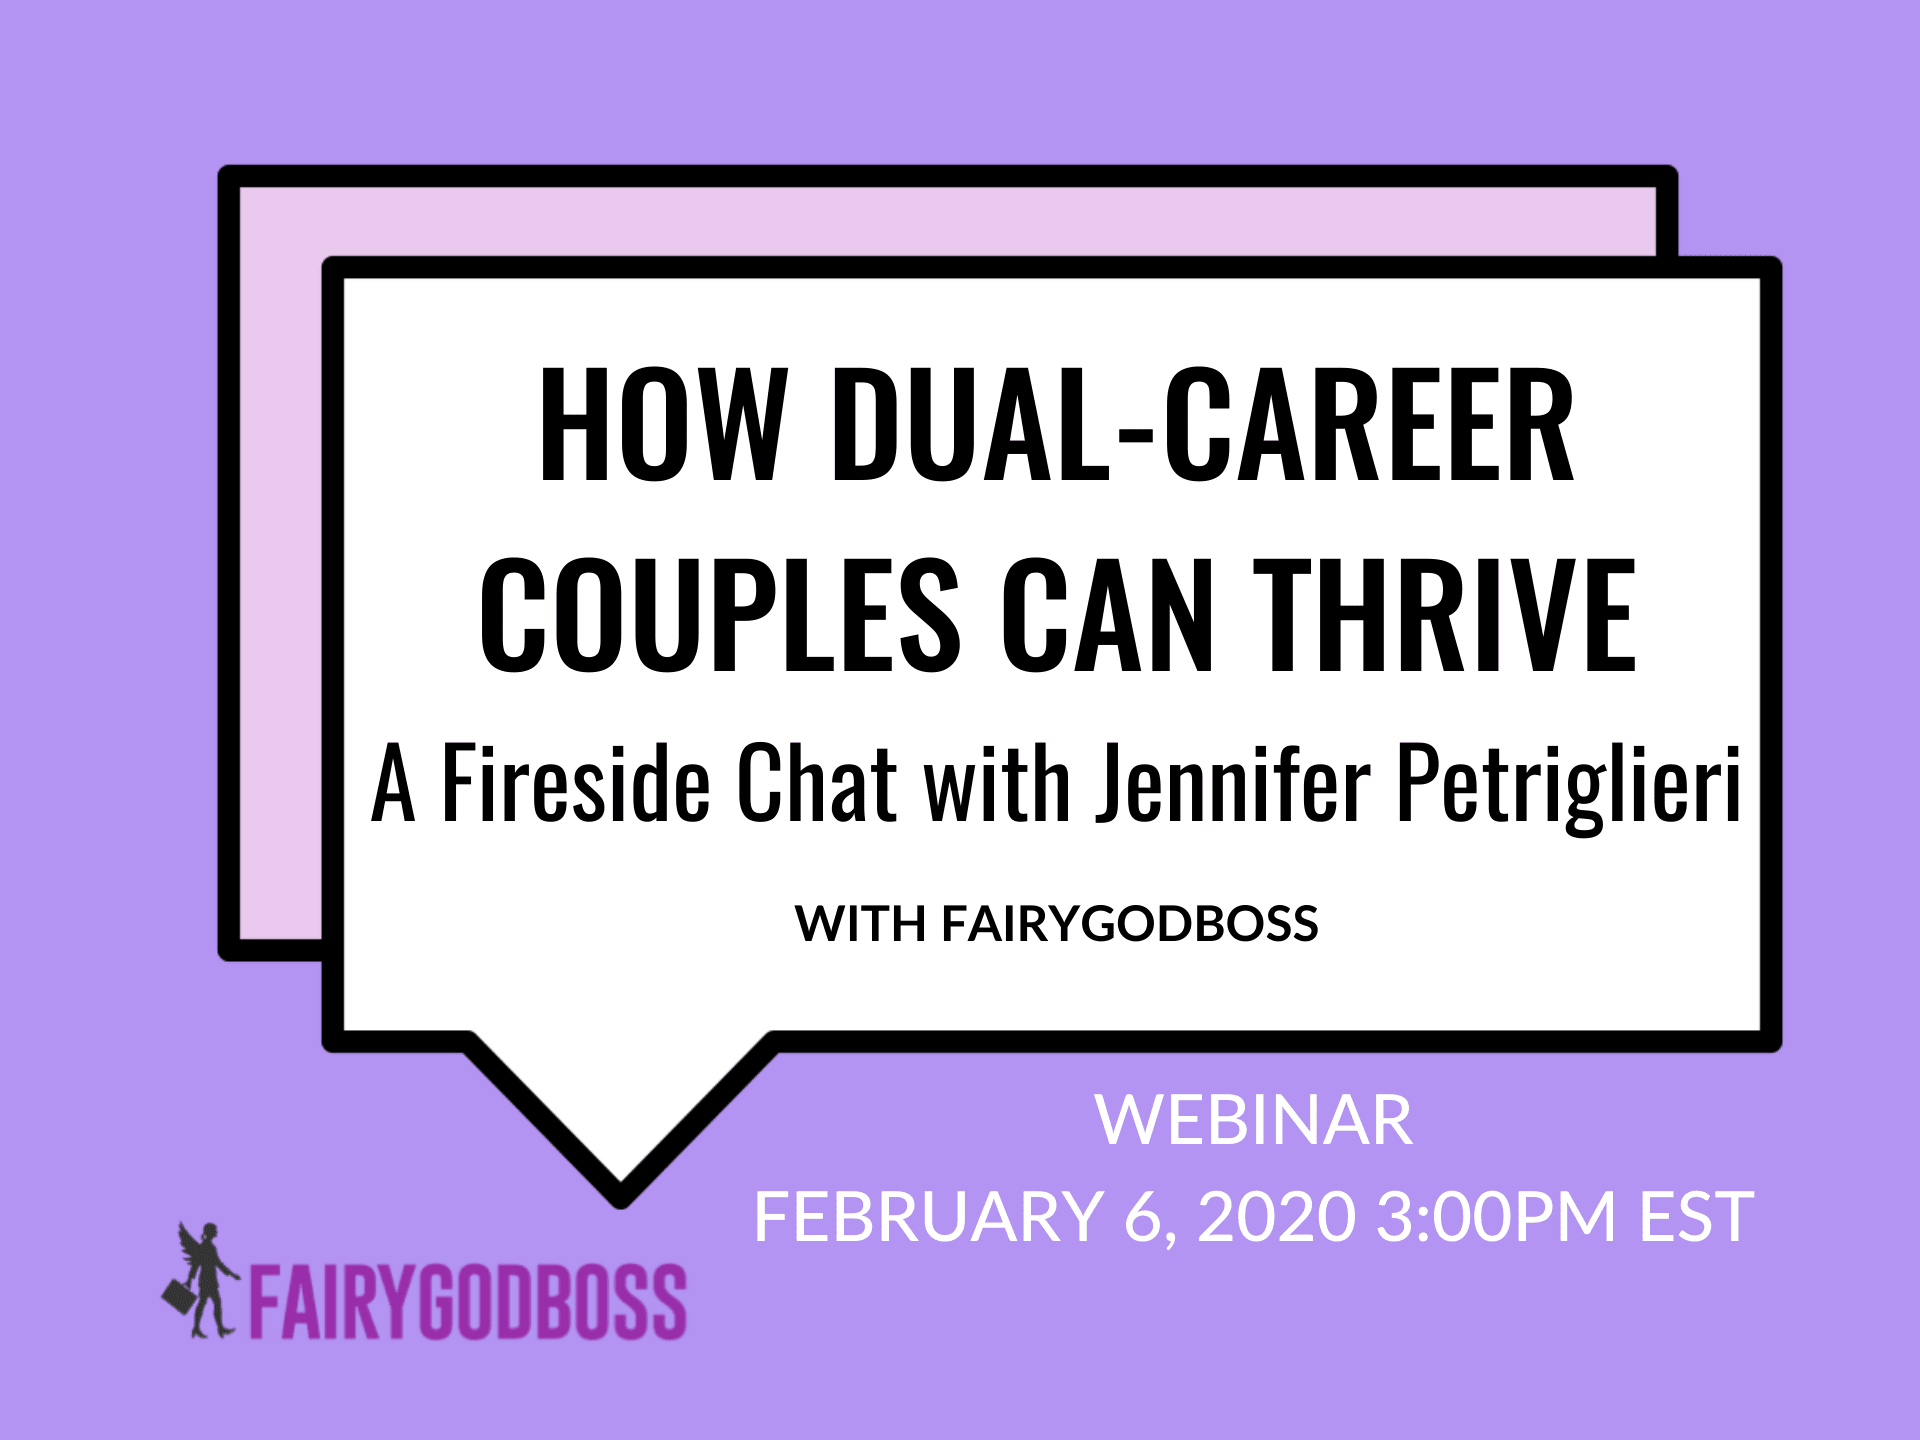 How Dual-Career Couples Can Thrive: A Fireside Chat with Jennifer Petriglieri